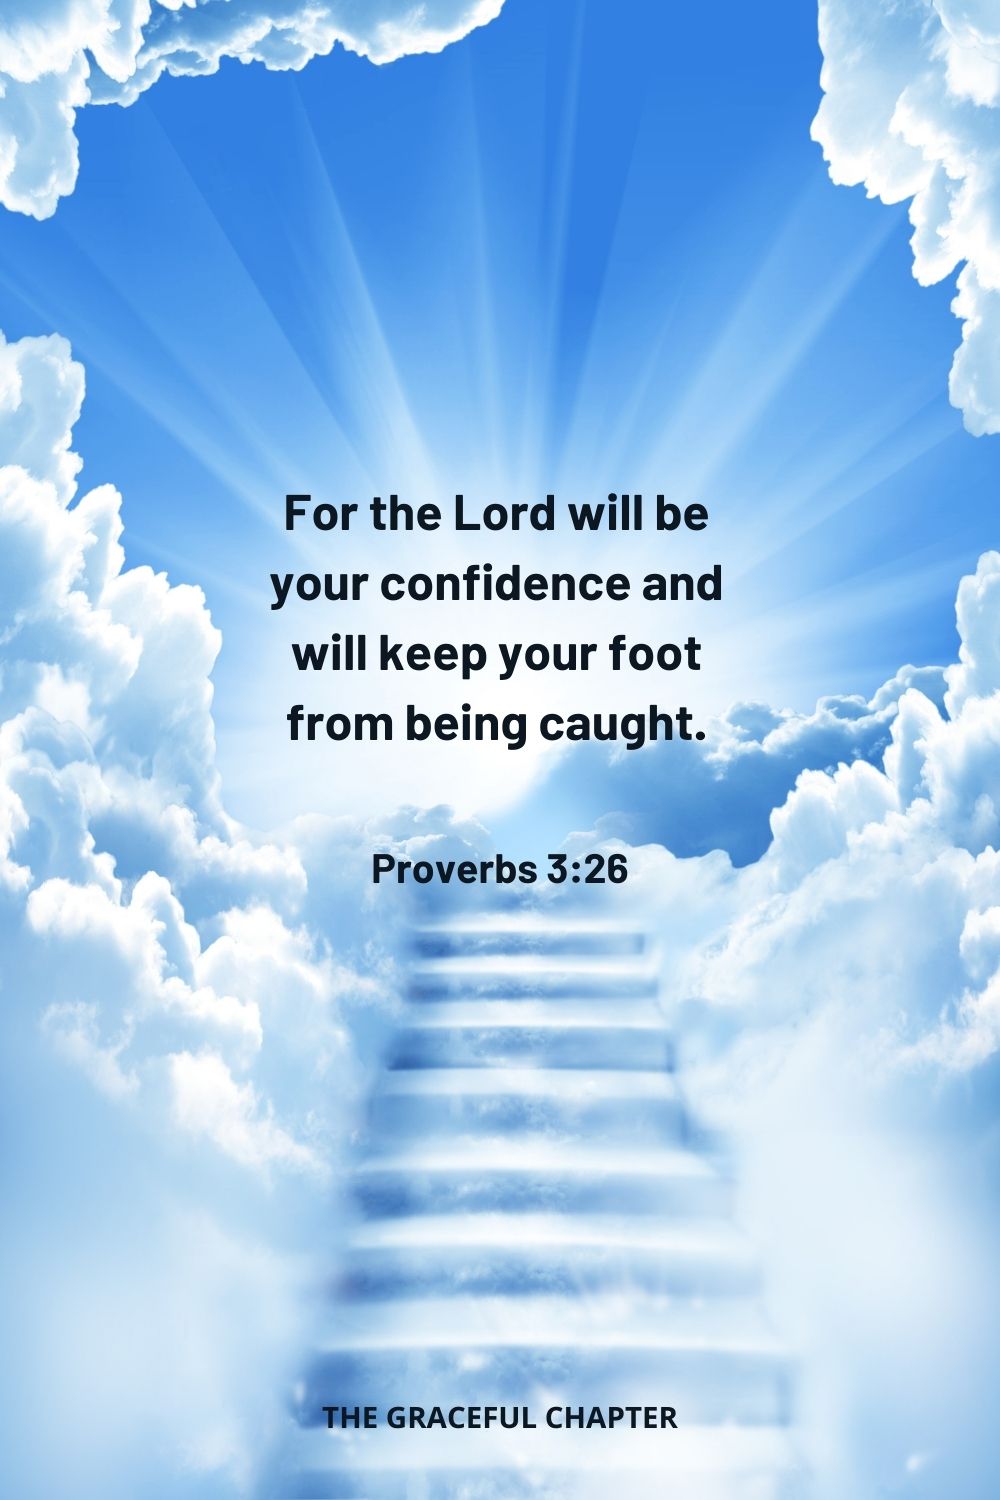 For the Lord will be your confidence and will keep your foot from being caught. Proverbs 3:26